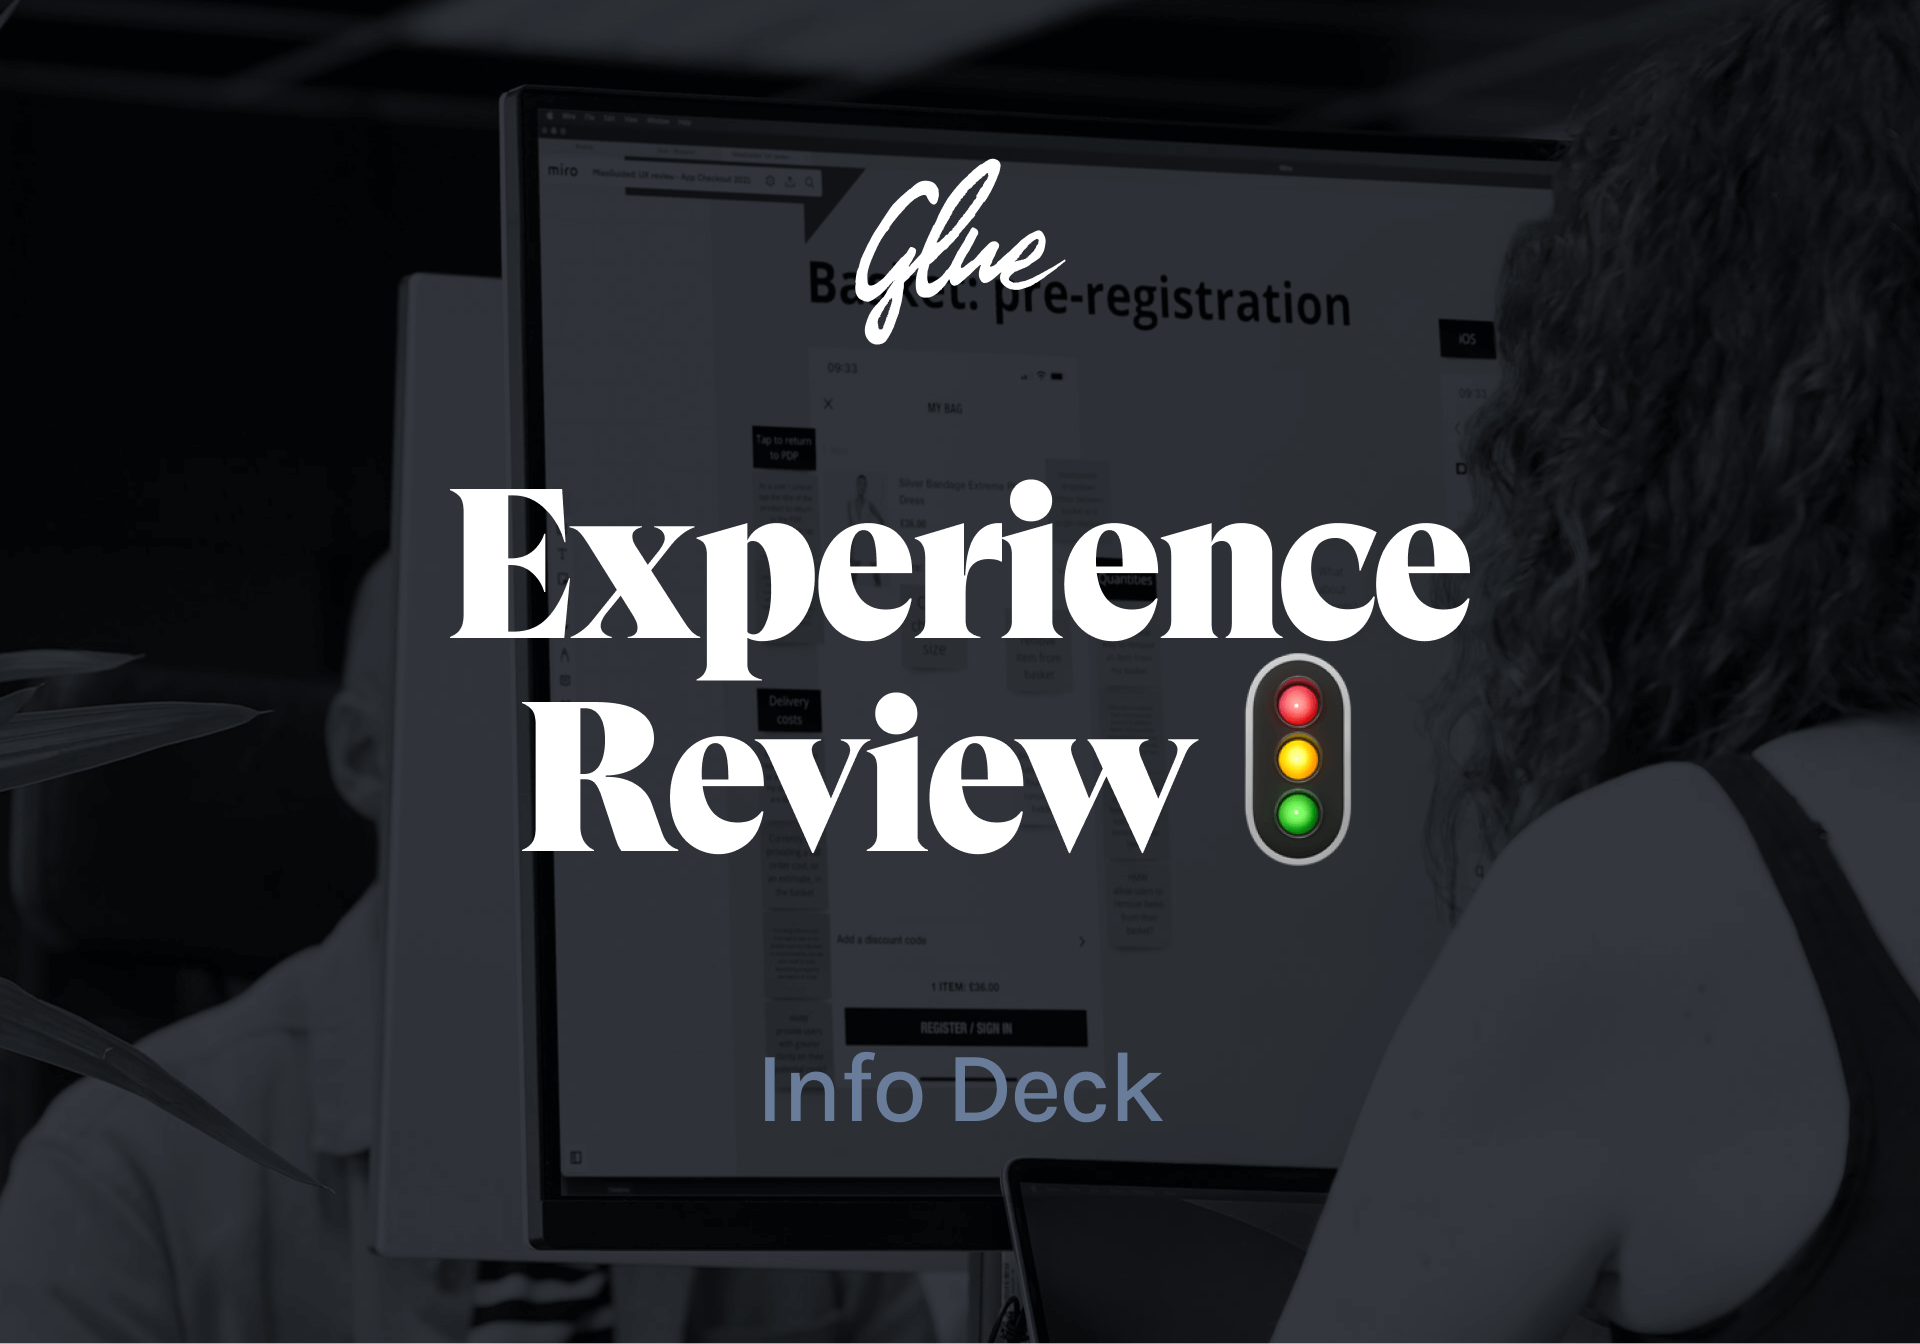 Glue Experience Review info-deck cover